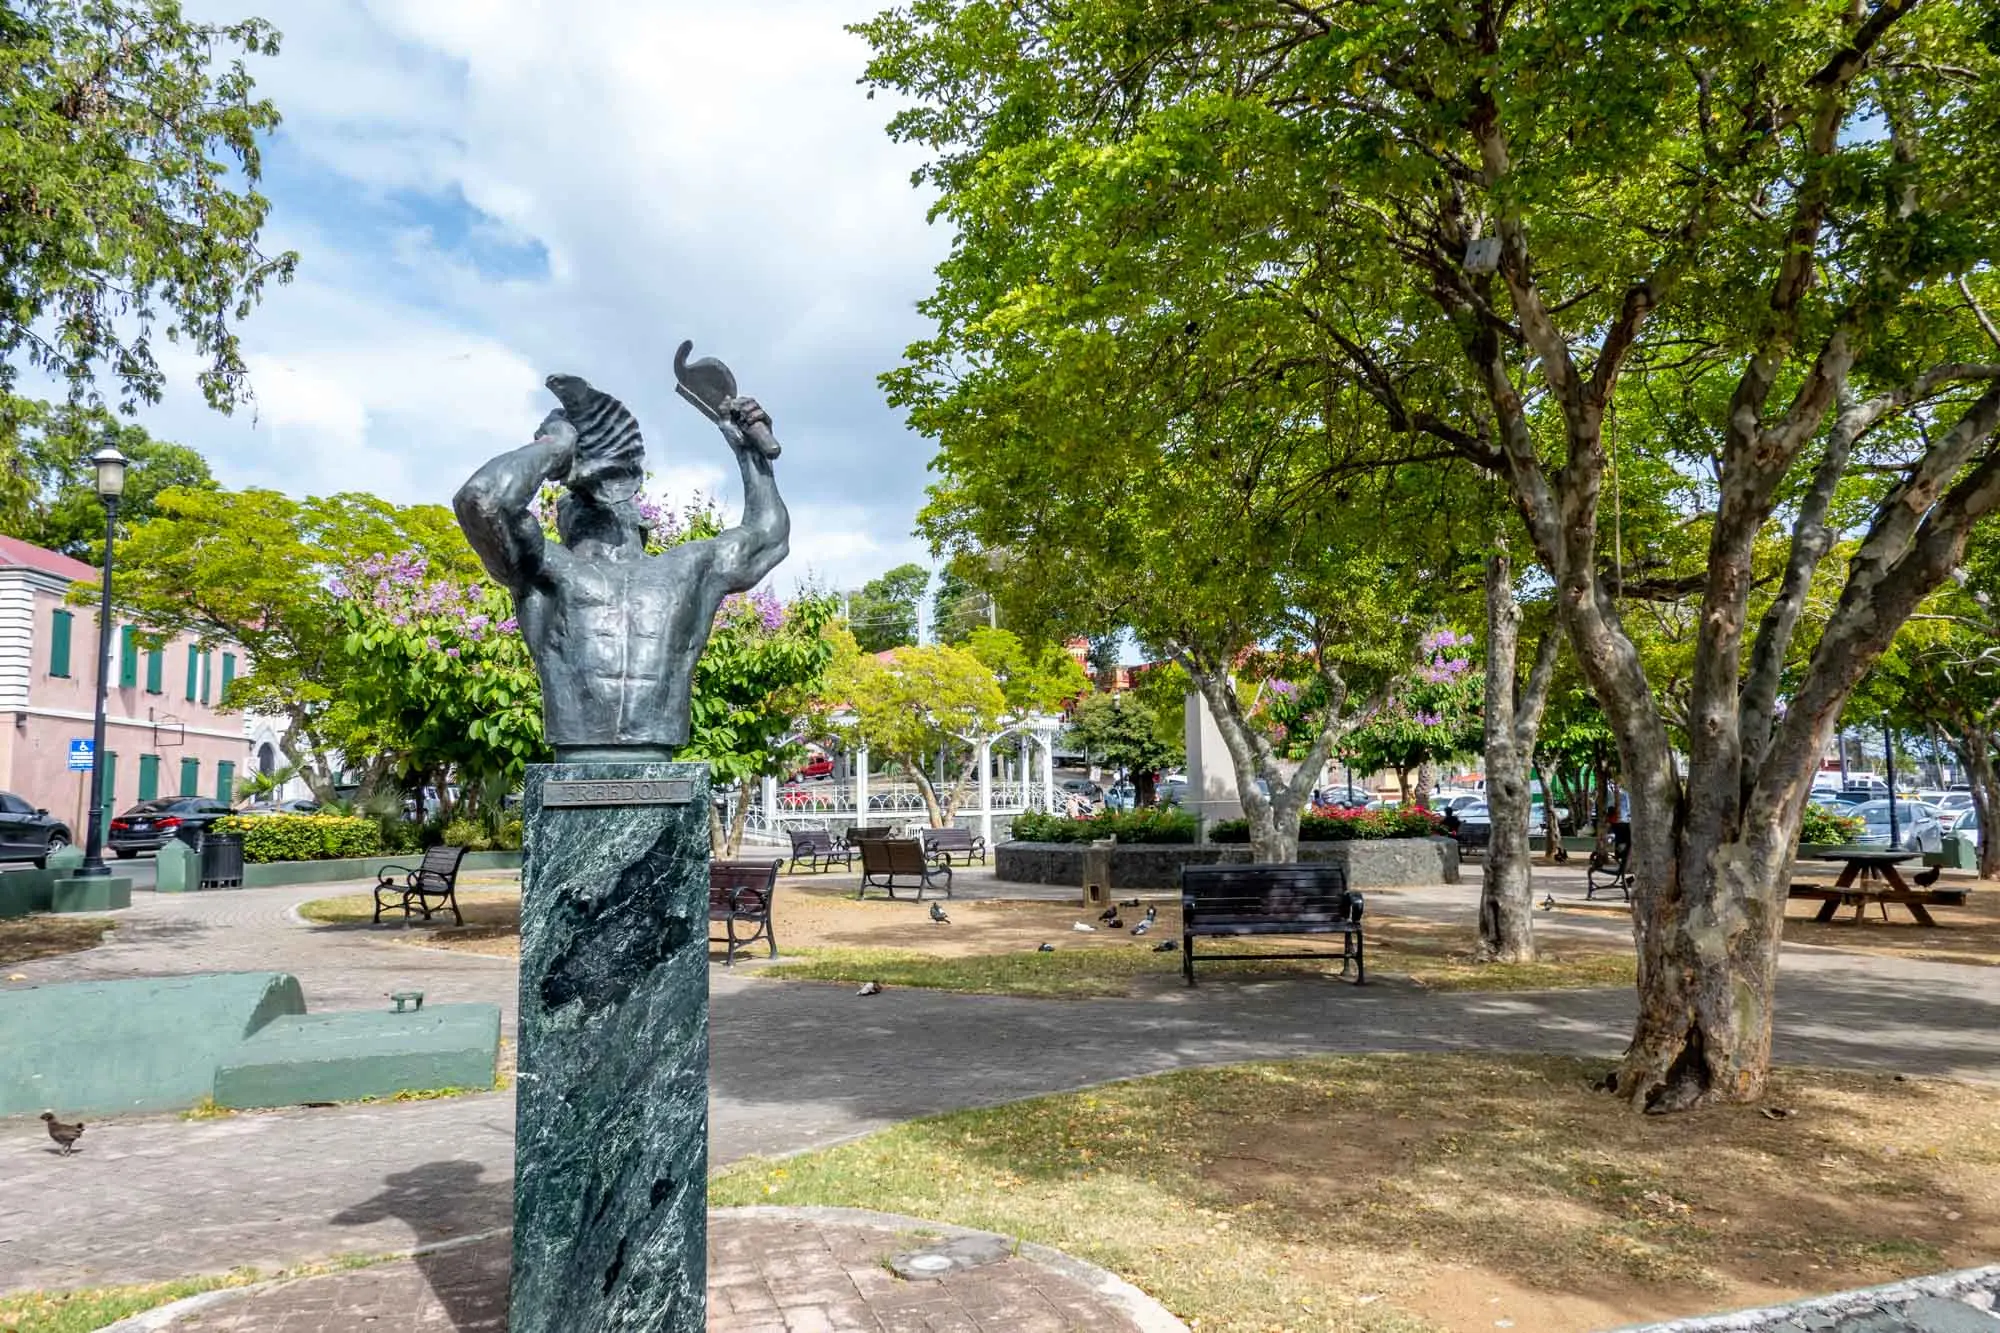 Statue of a man blowing a conch shell in a park with benches and trees